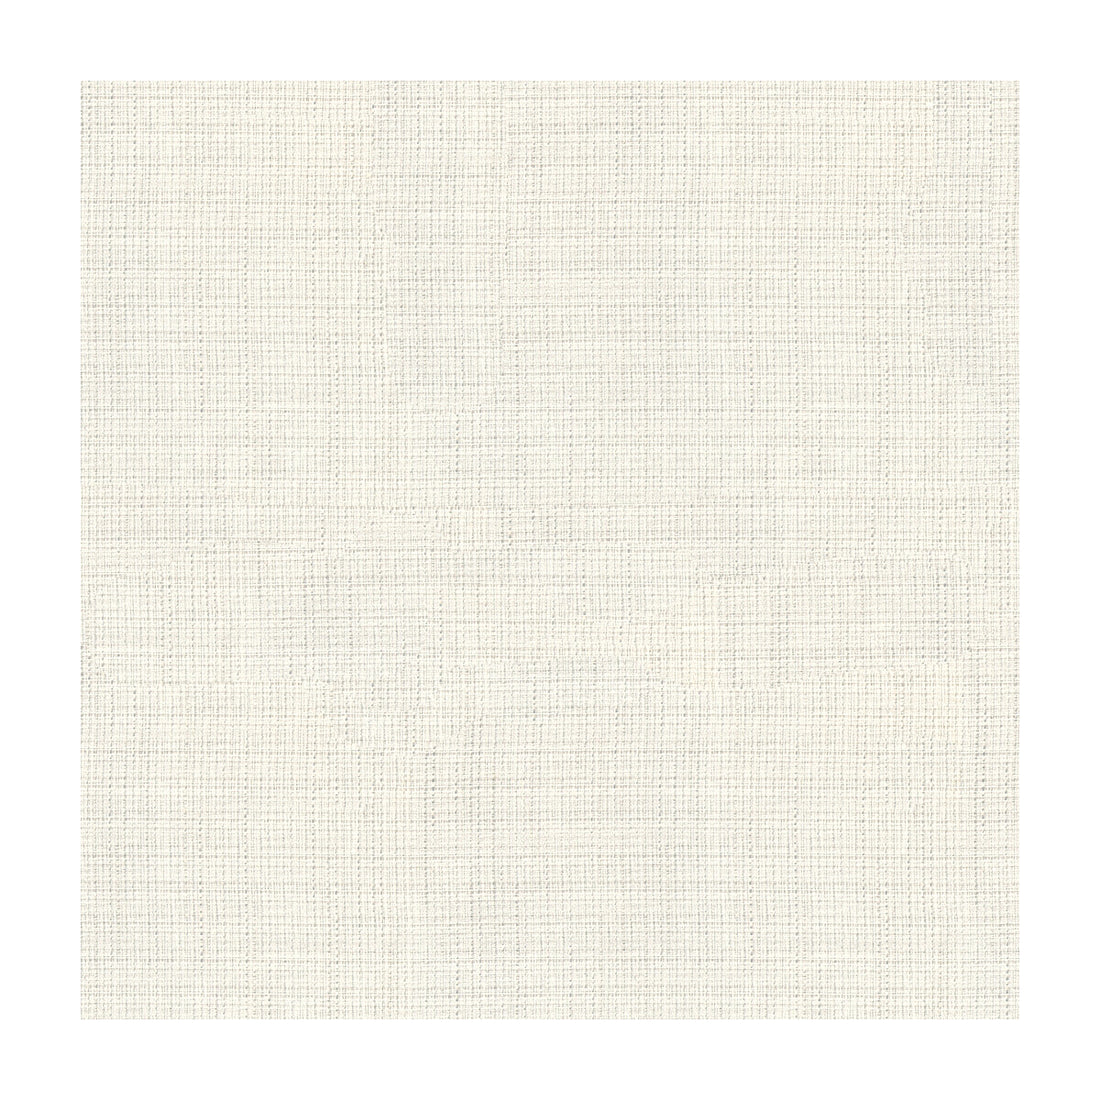 Kravet Contract fabric in 4150-101 color - pattern 4150.101.0 - by Kravet Contract